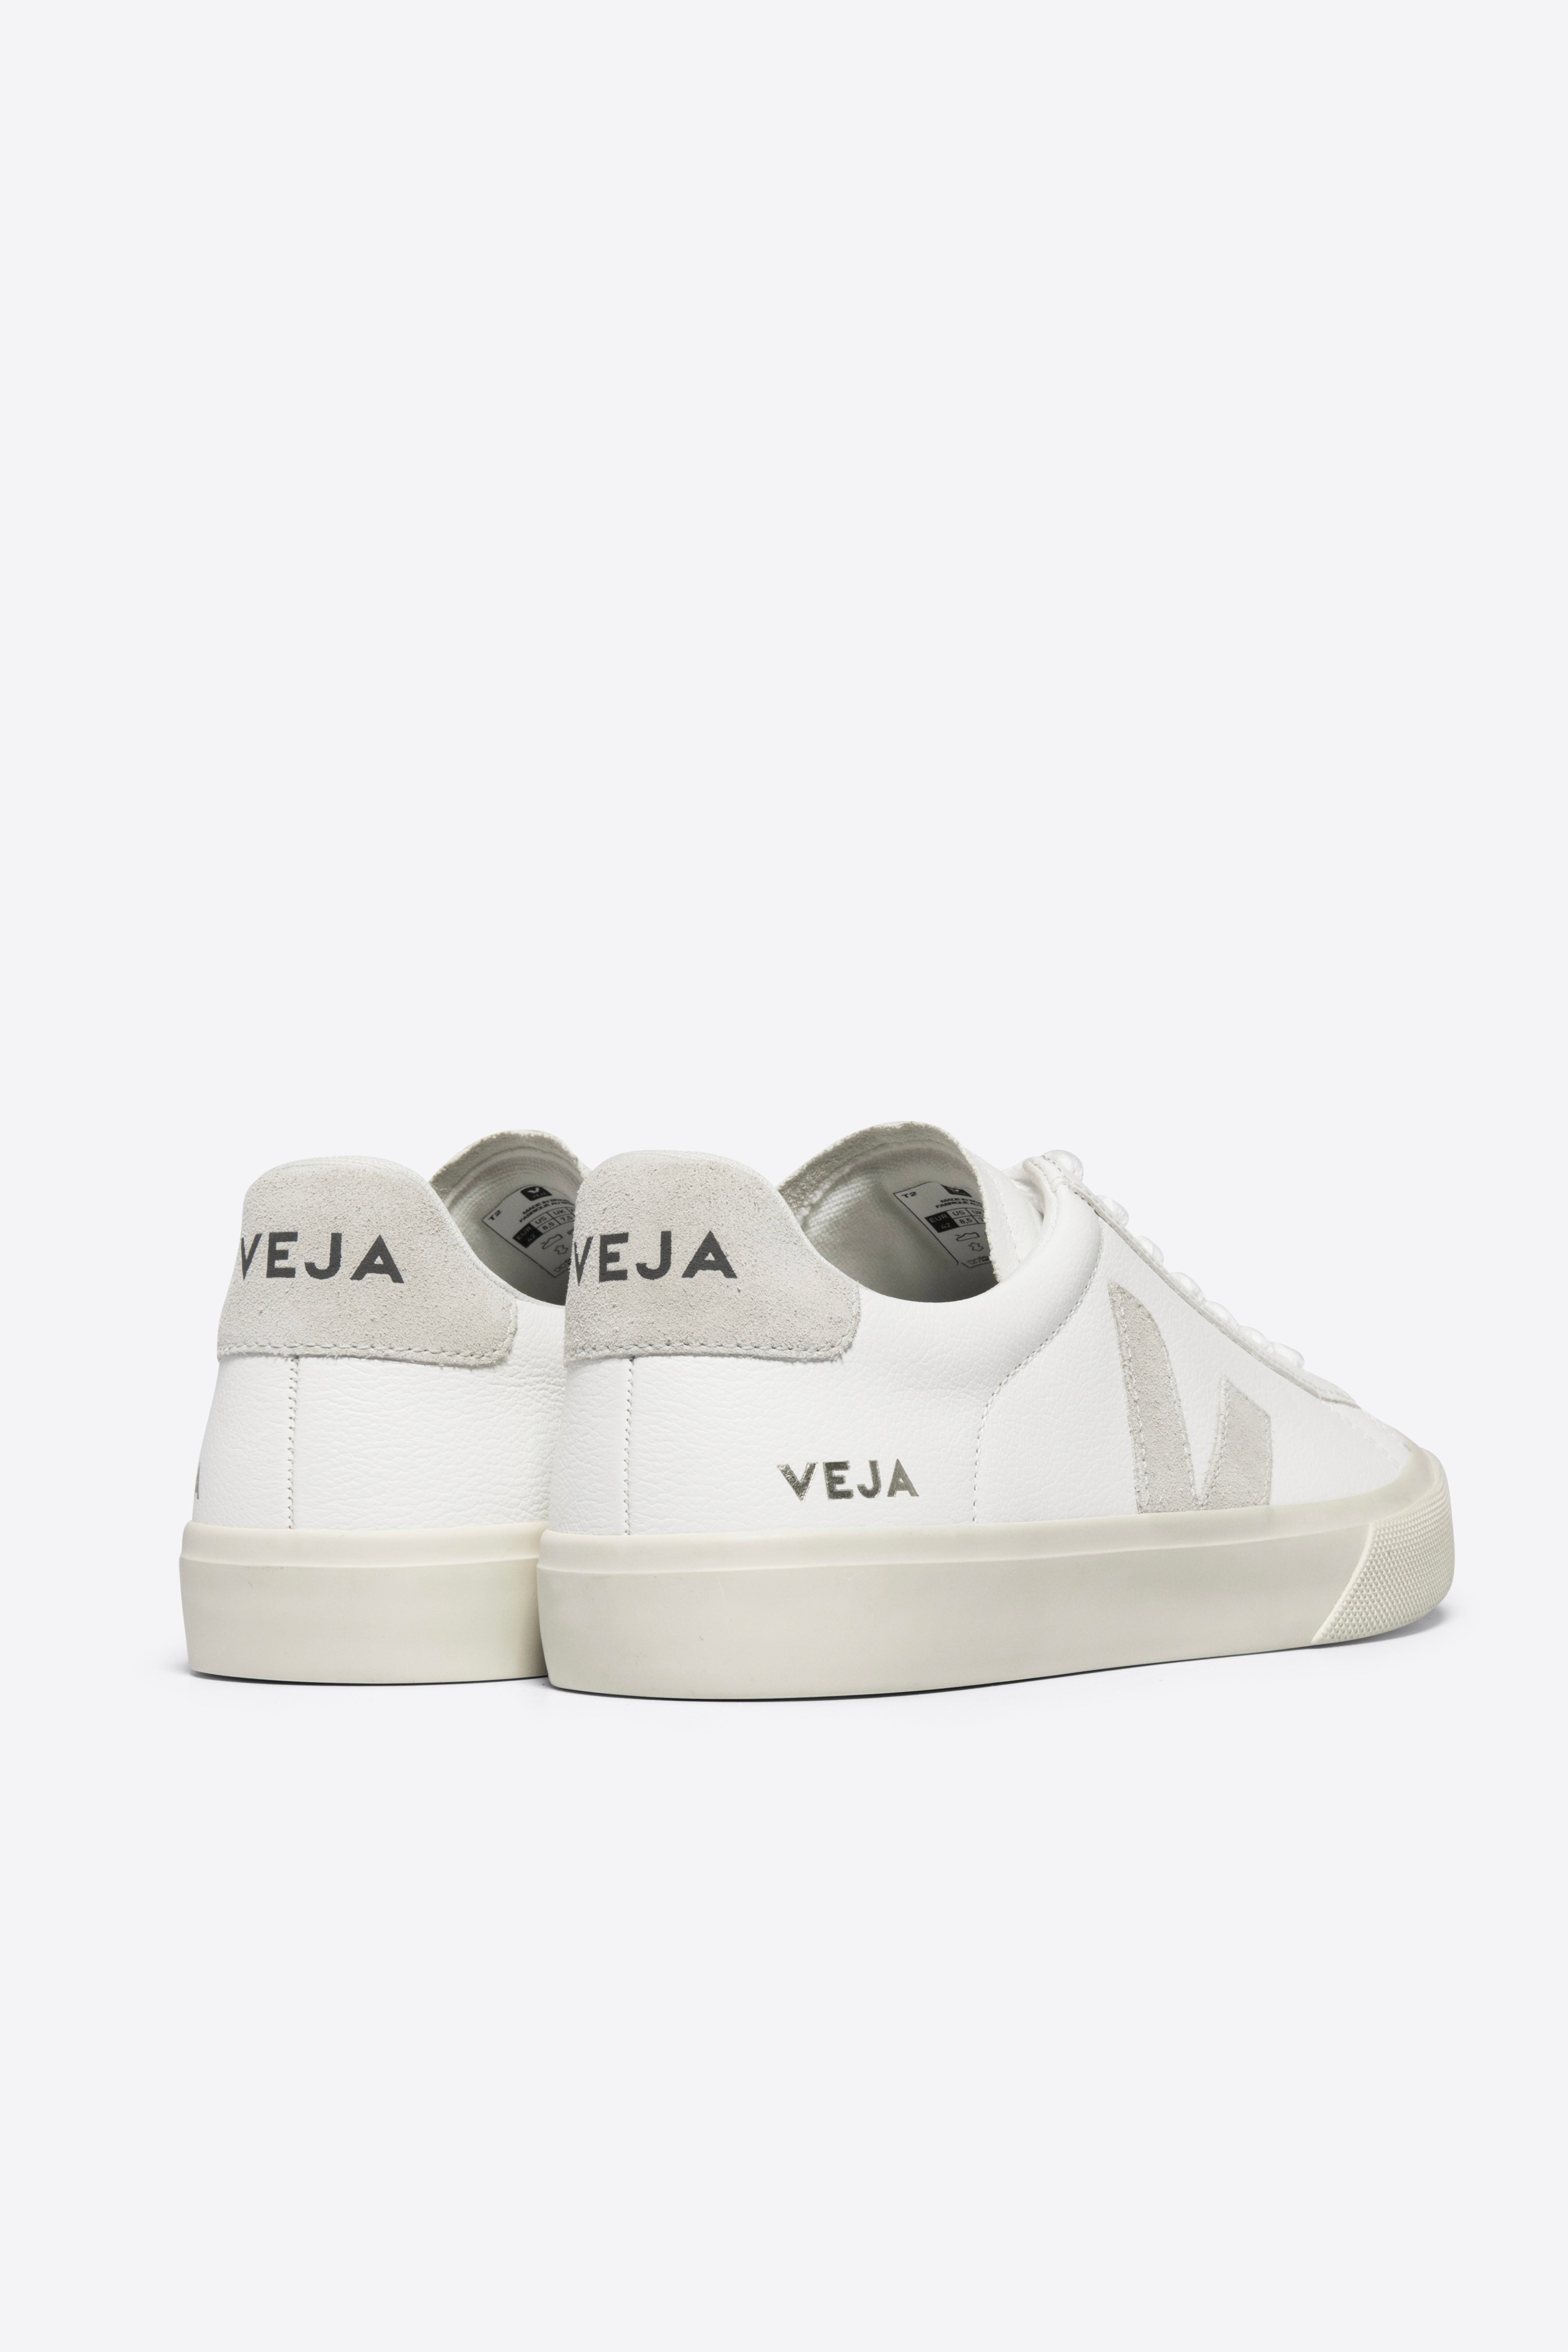 Veja - Campo White Natural Suede Sneaker